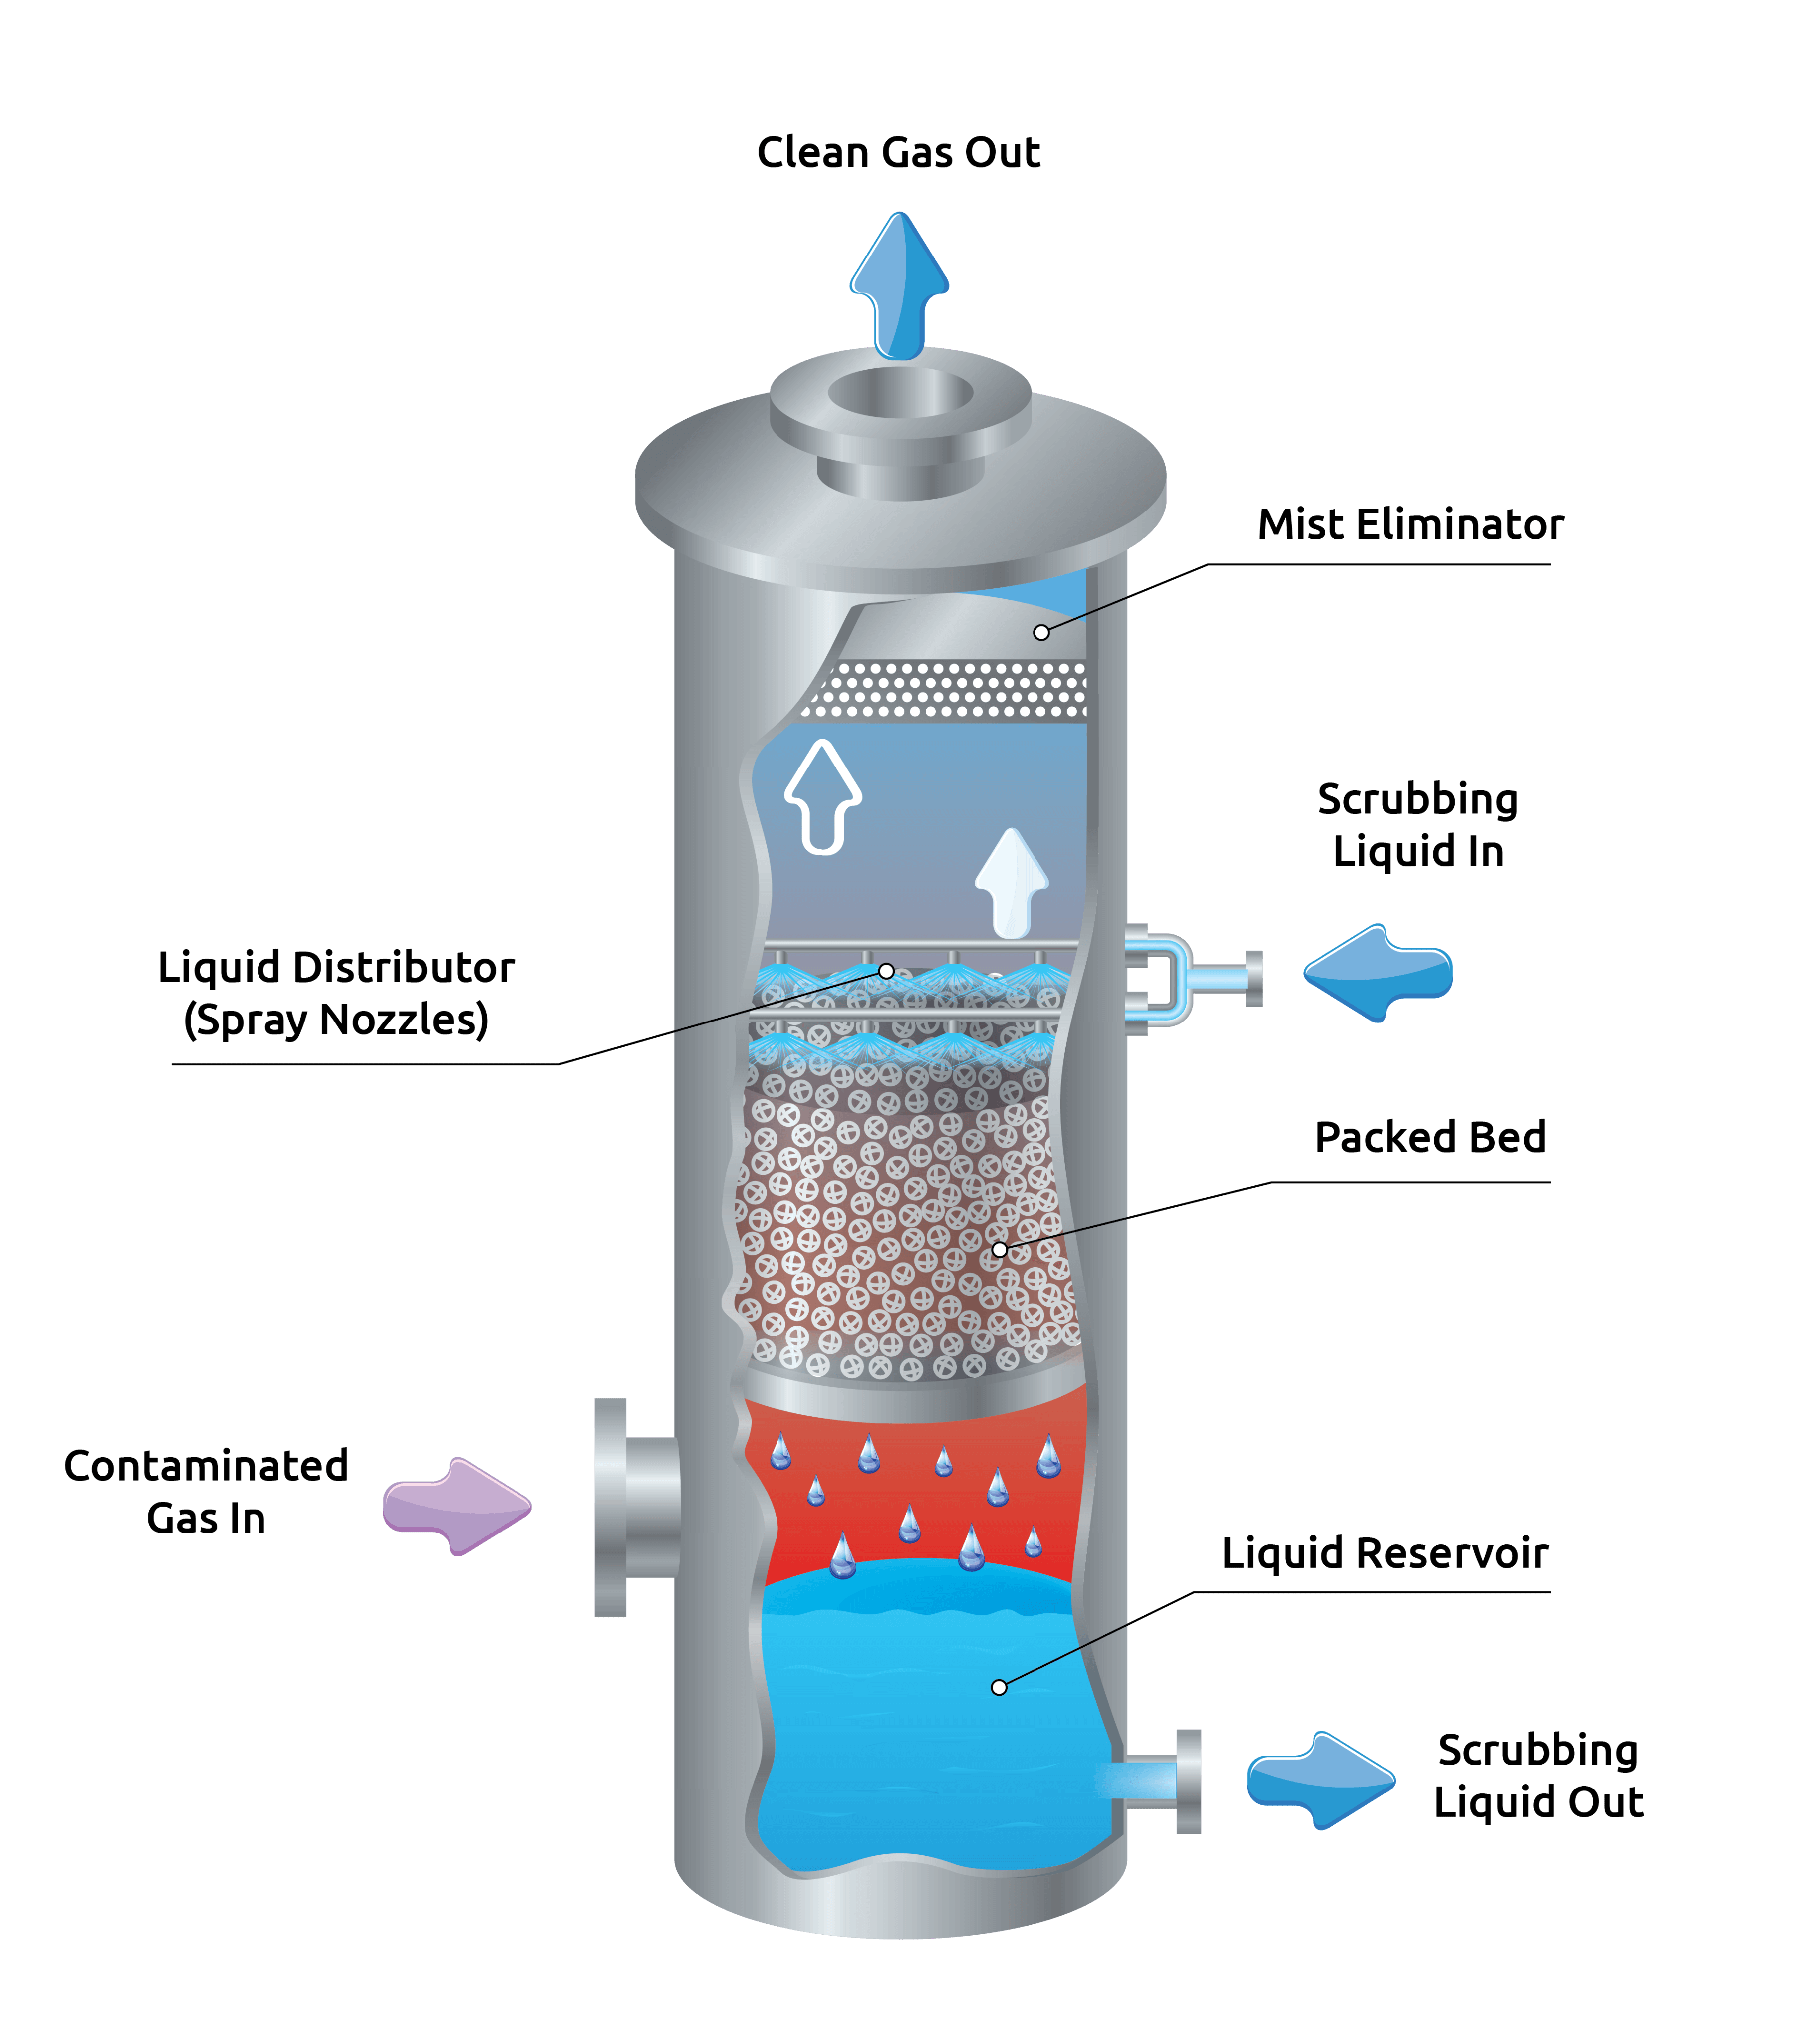 An illustration of a packed bed distribution column for scrubbing contaminated gas with spray nozzles installed over a packed bed.